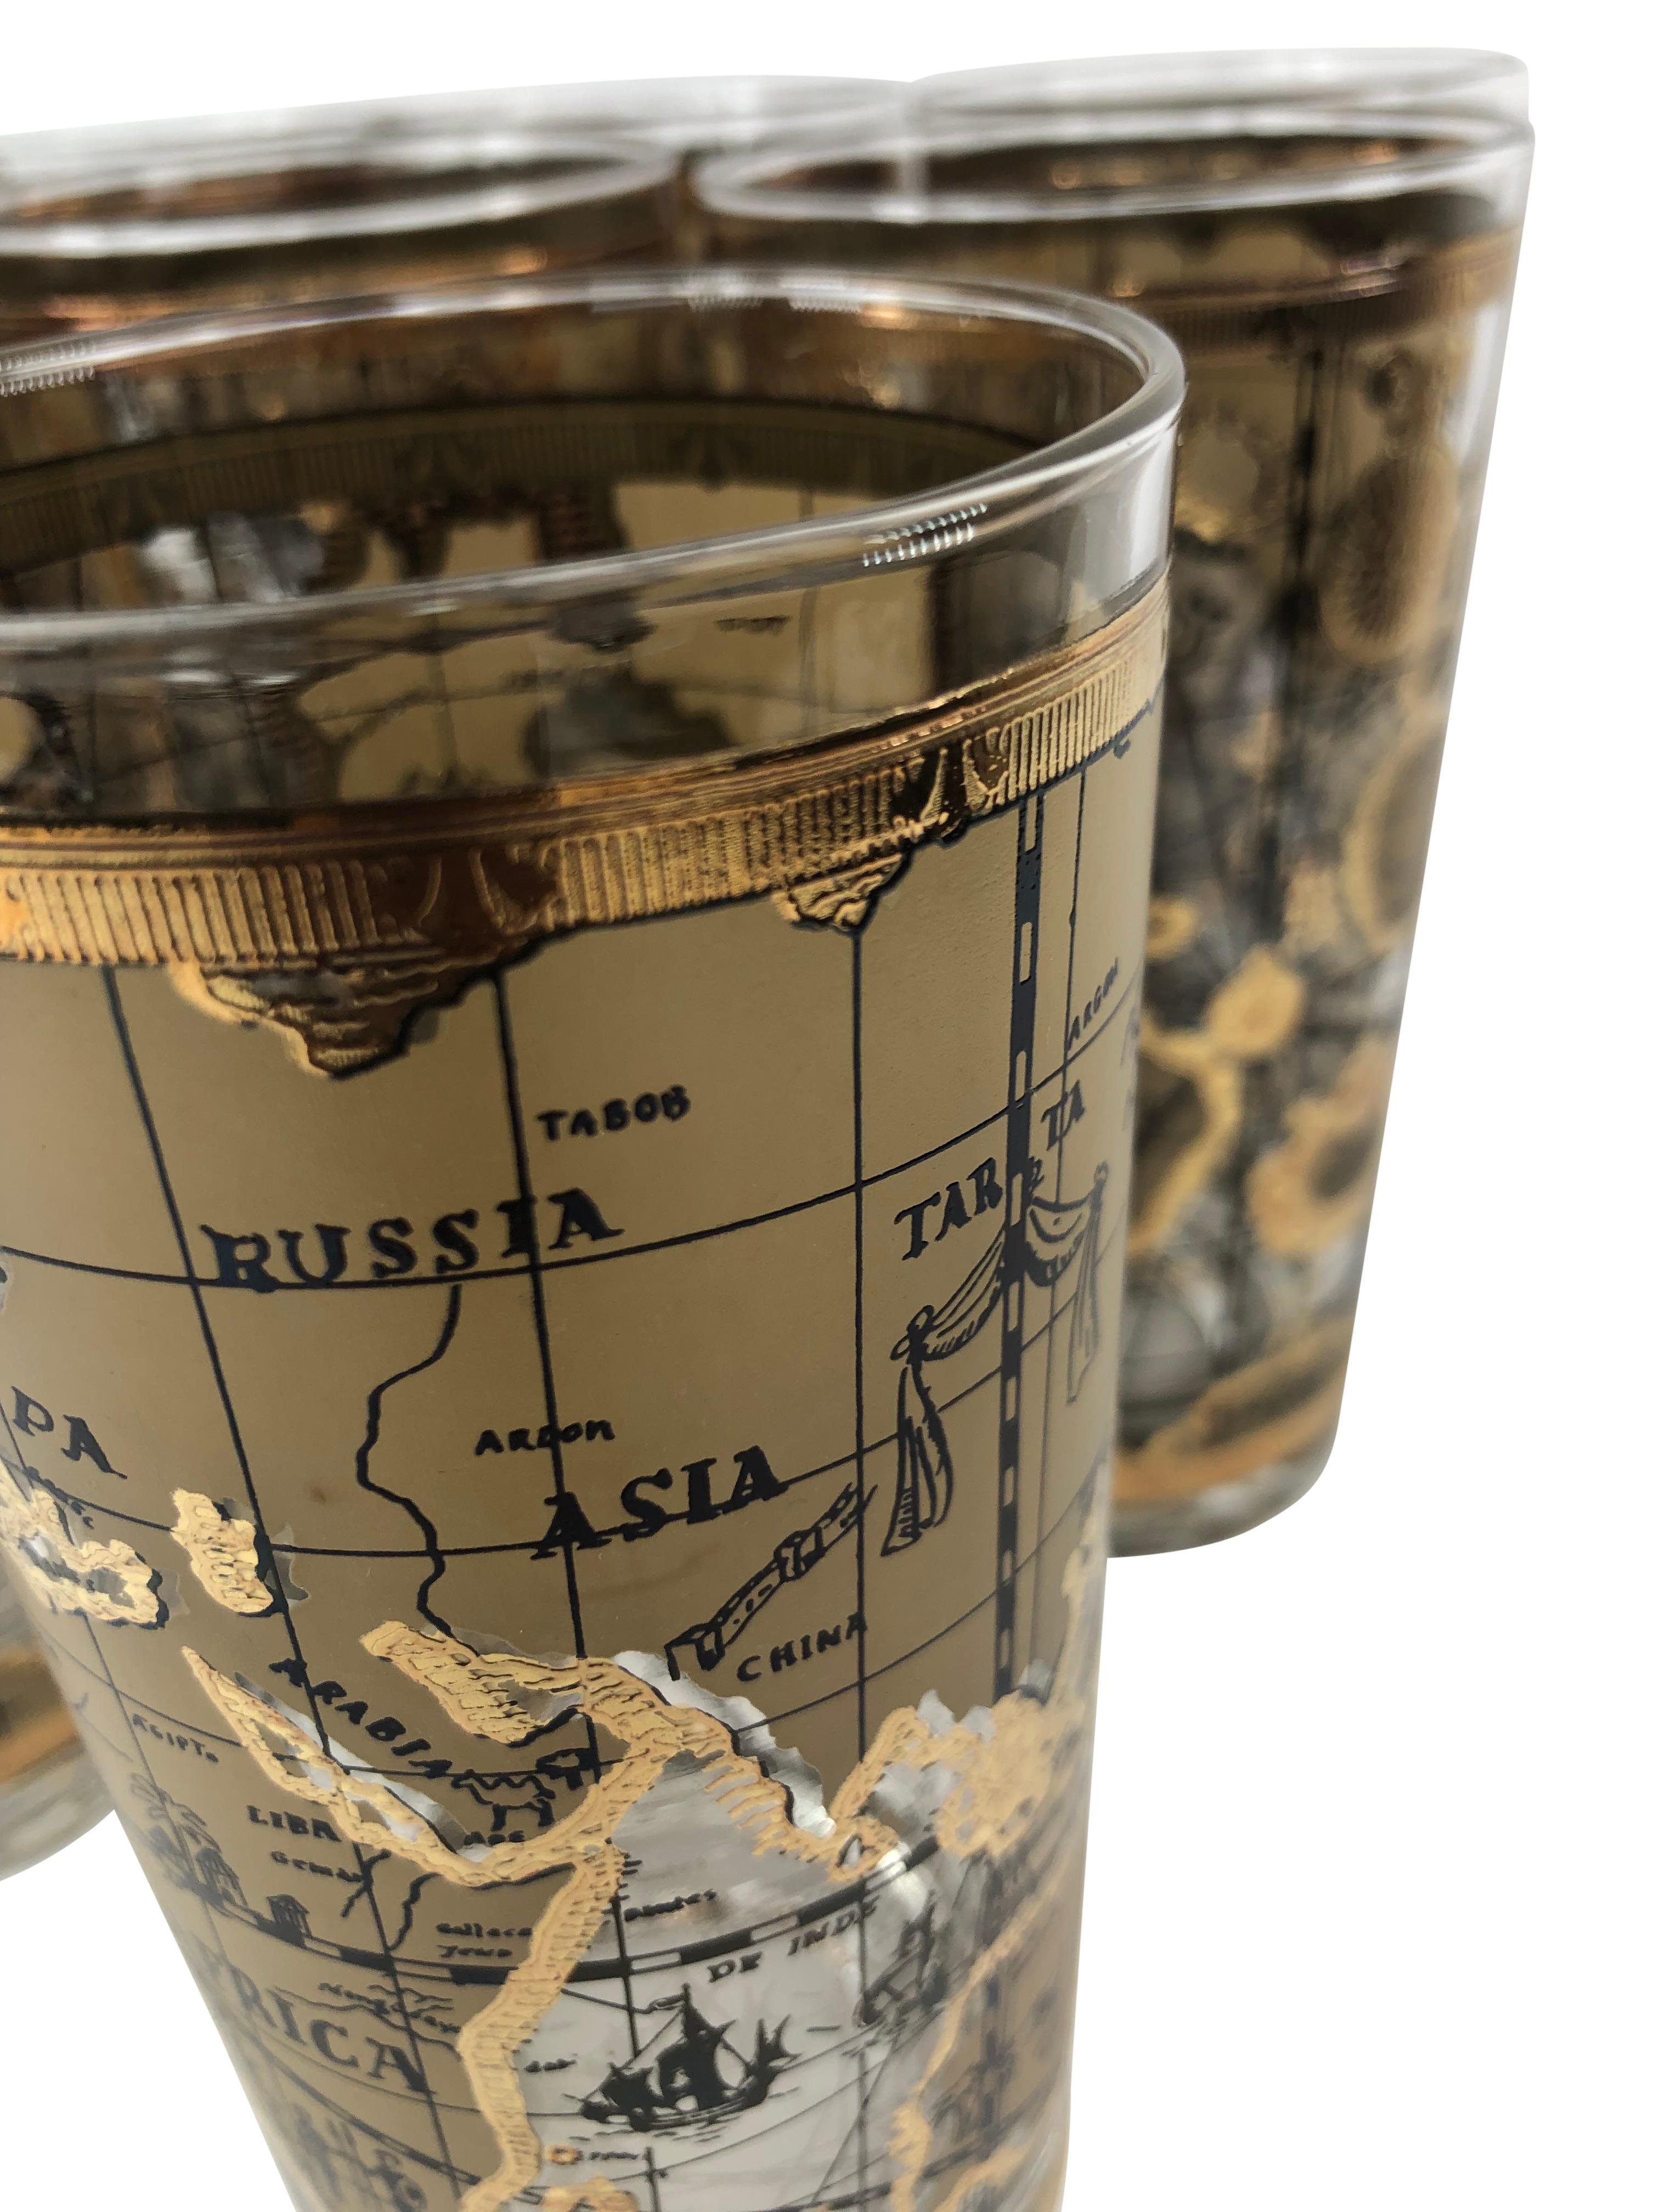 Vintage Cera Glass Highball Glasses With Old World Maps - Set of 8 For Sale 3